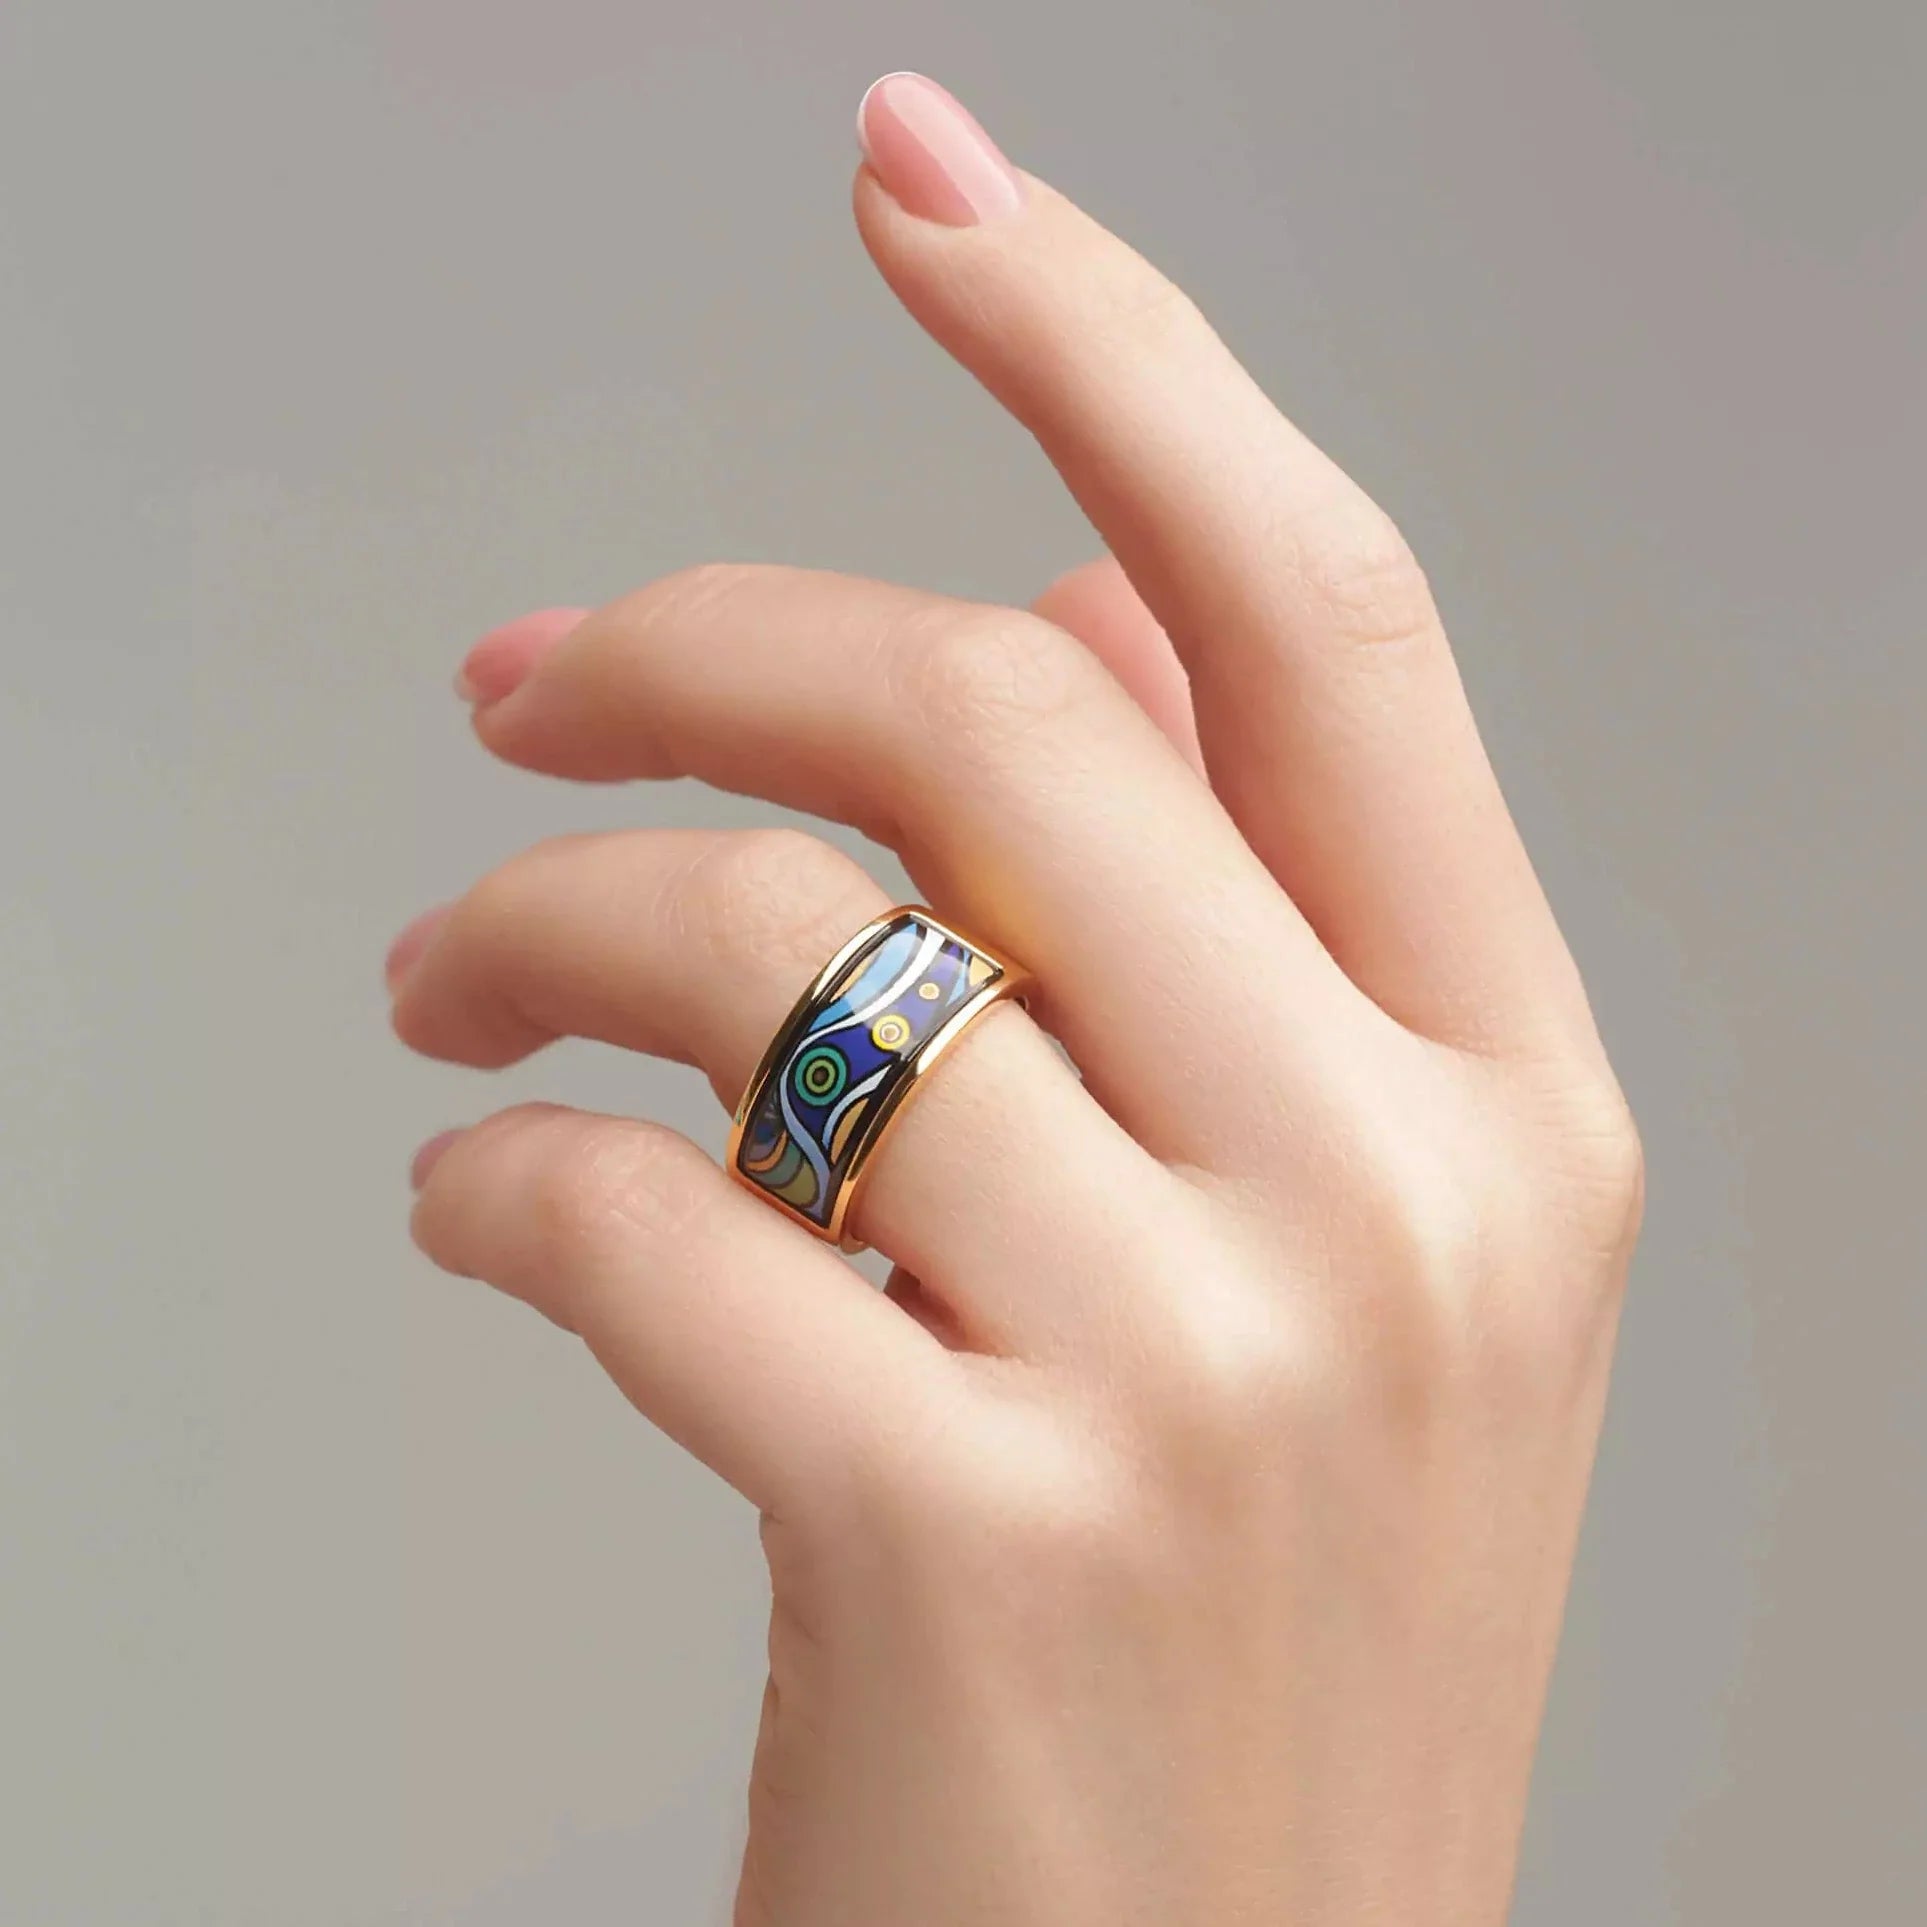 A woman's hand is wearing a ring from the Starry Night collection